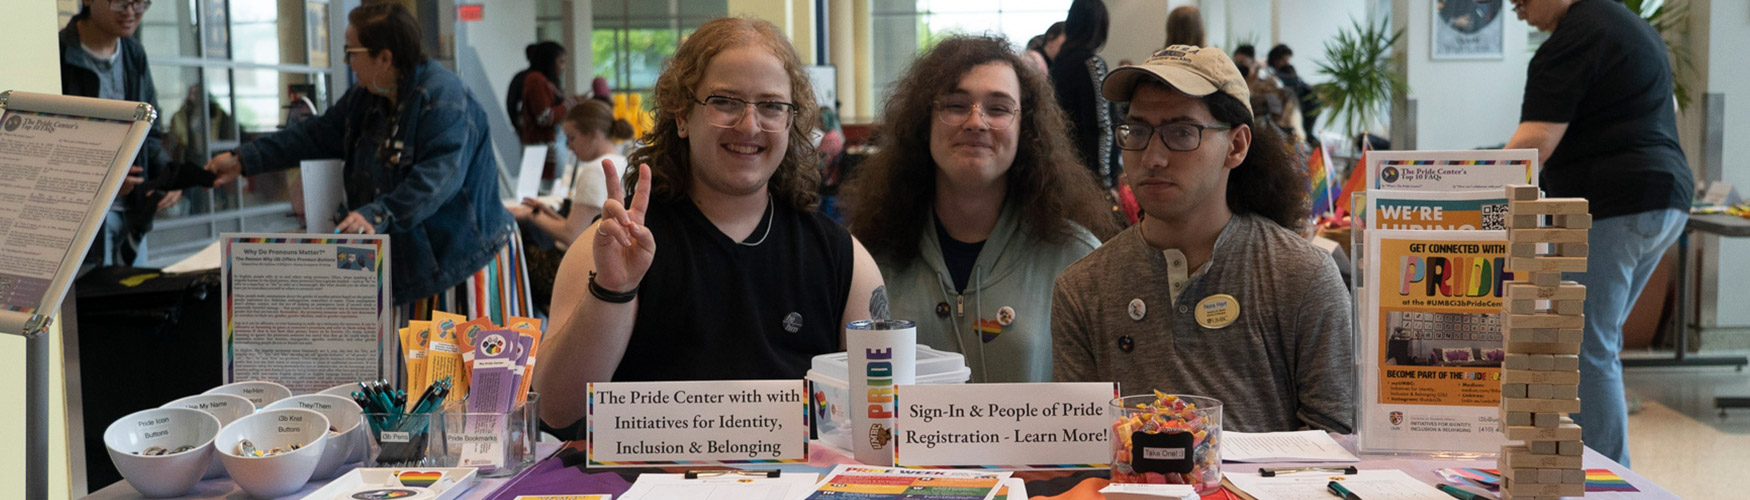 Students at Pride Center table at event